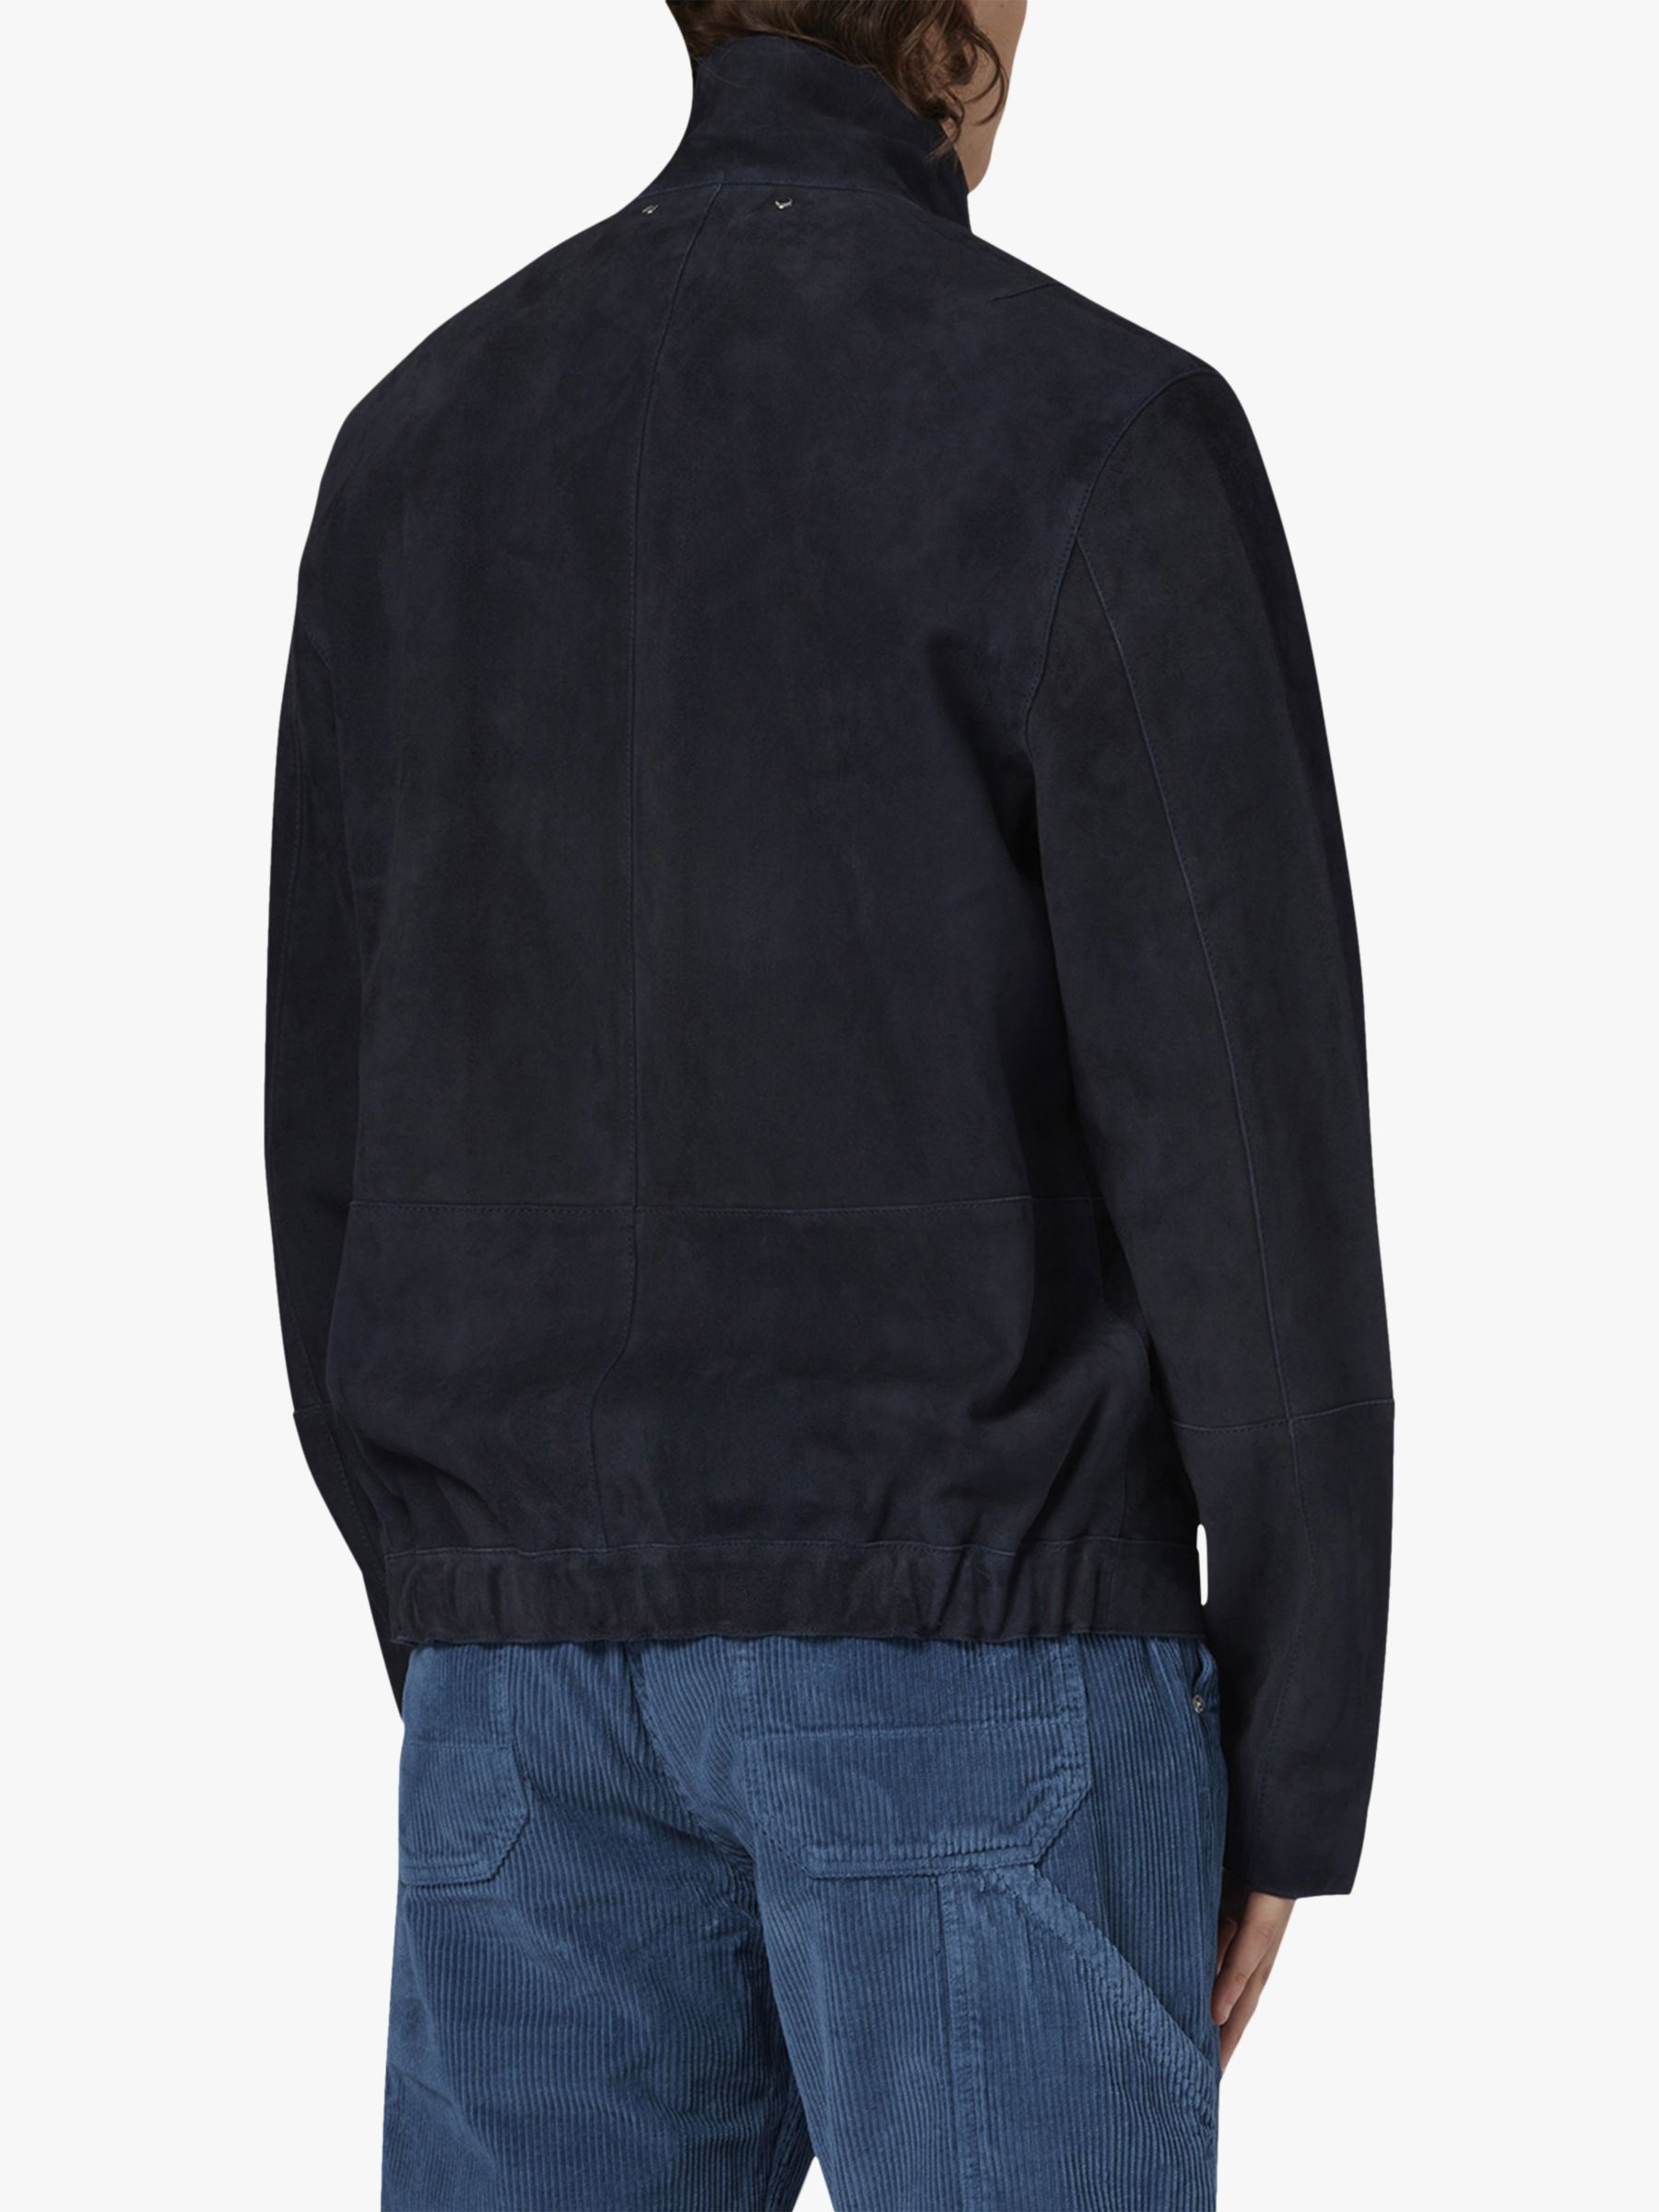 Paul Smith Suede Jacket, Navy at John Lewis & Partners